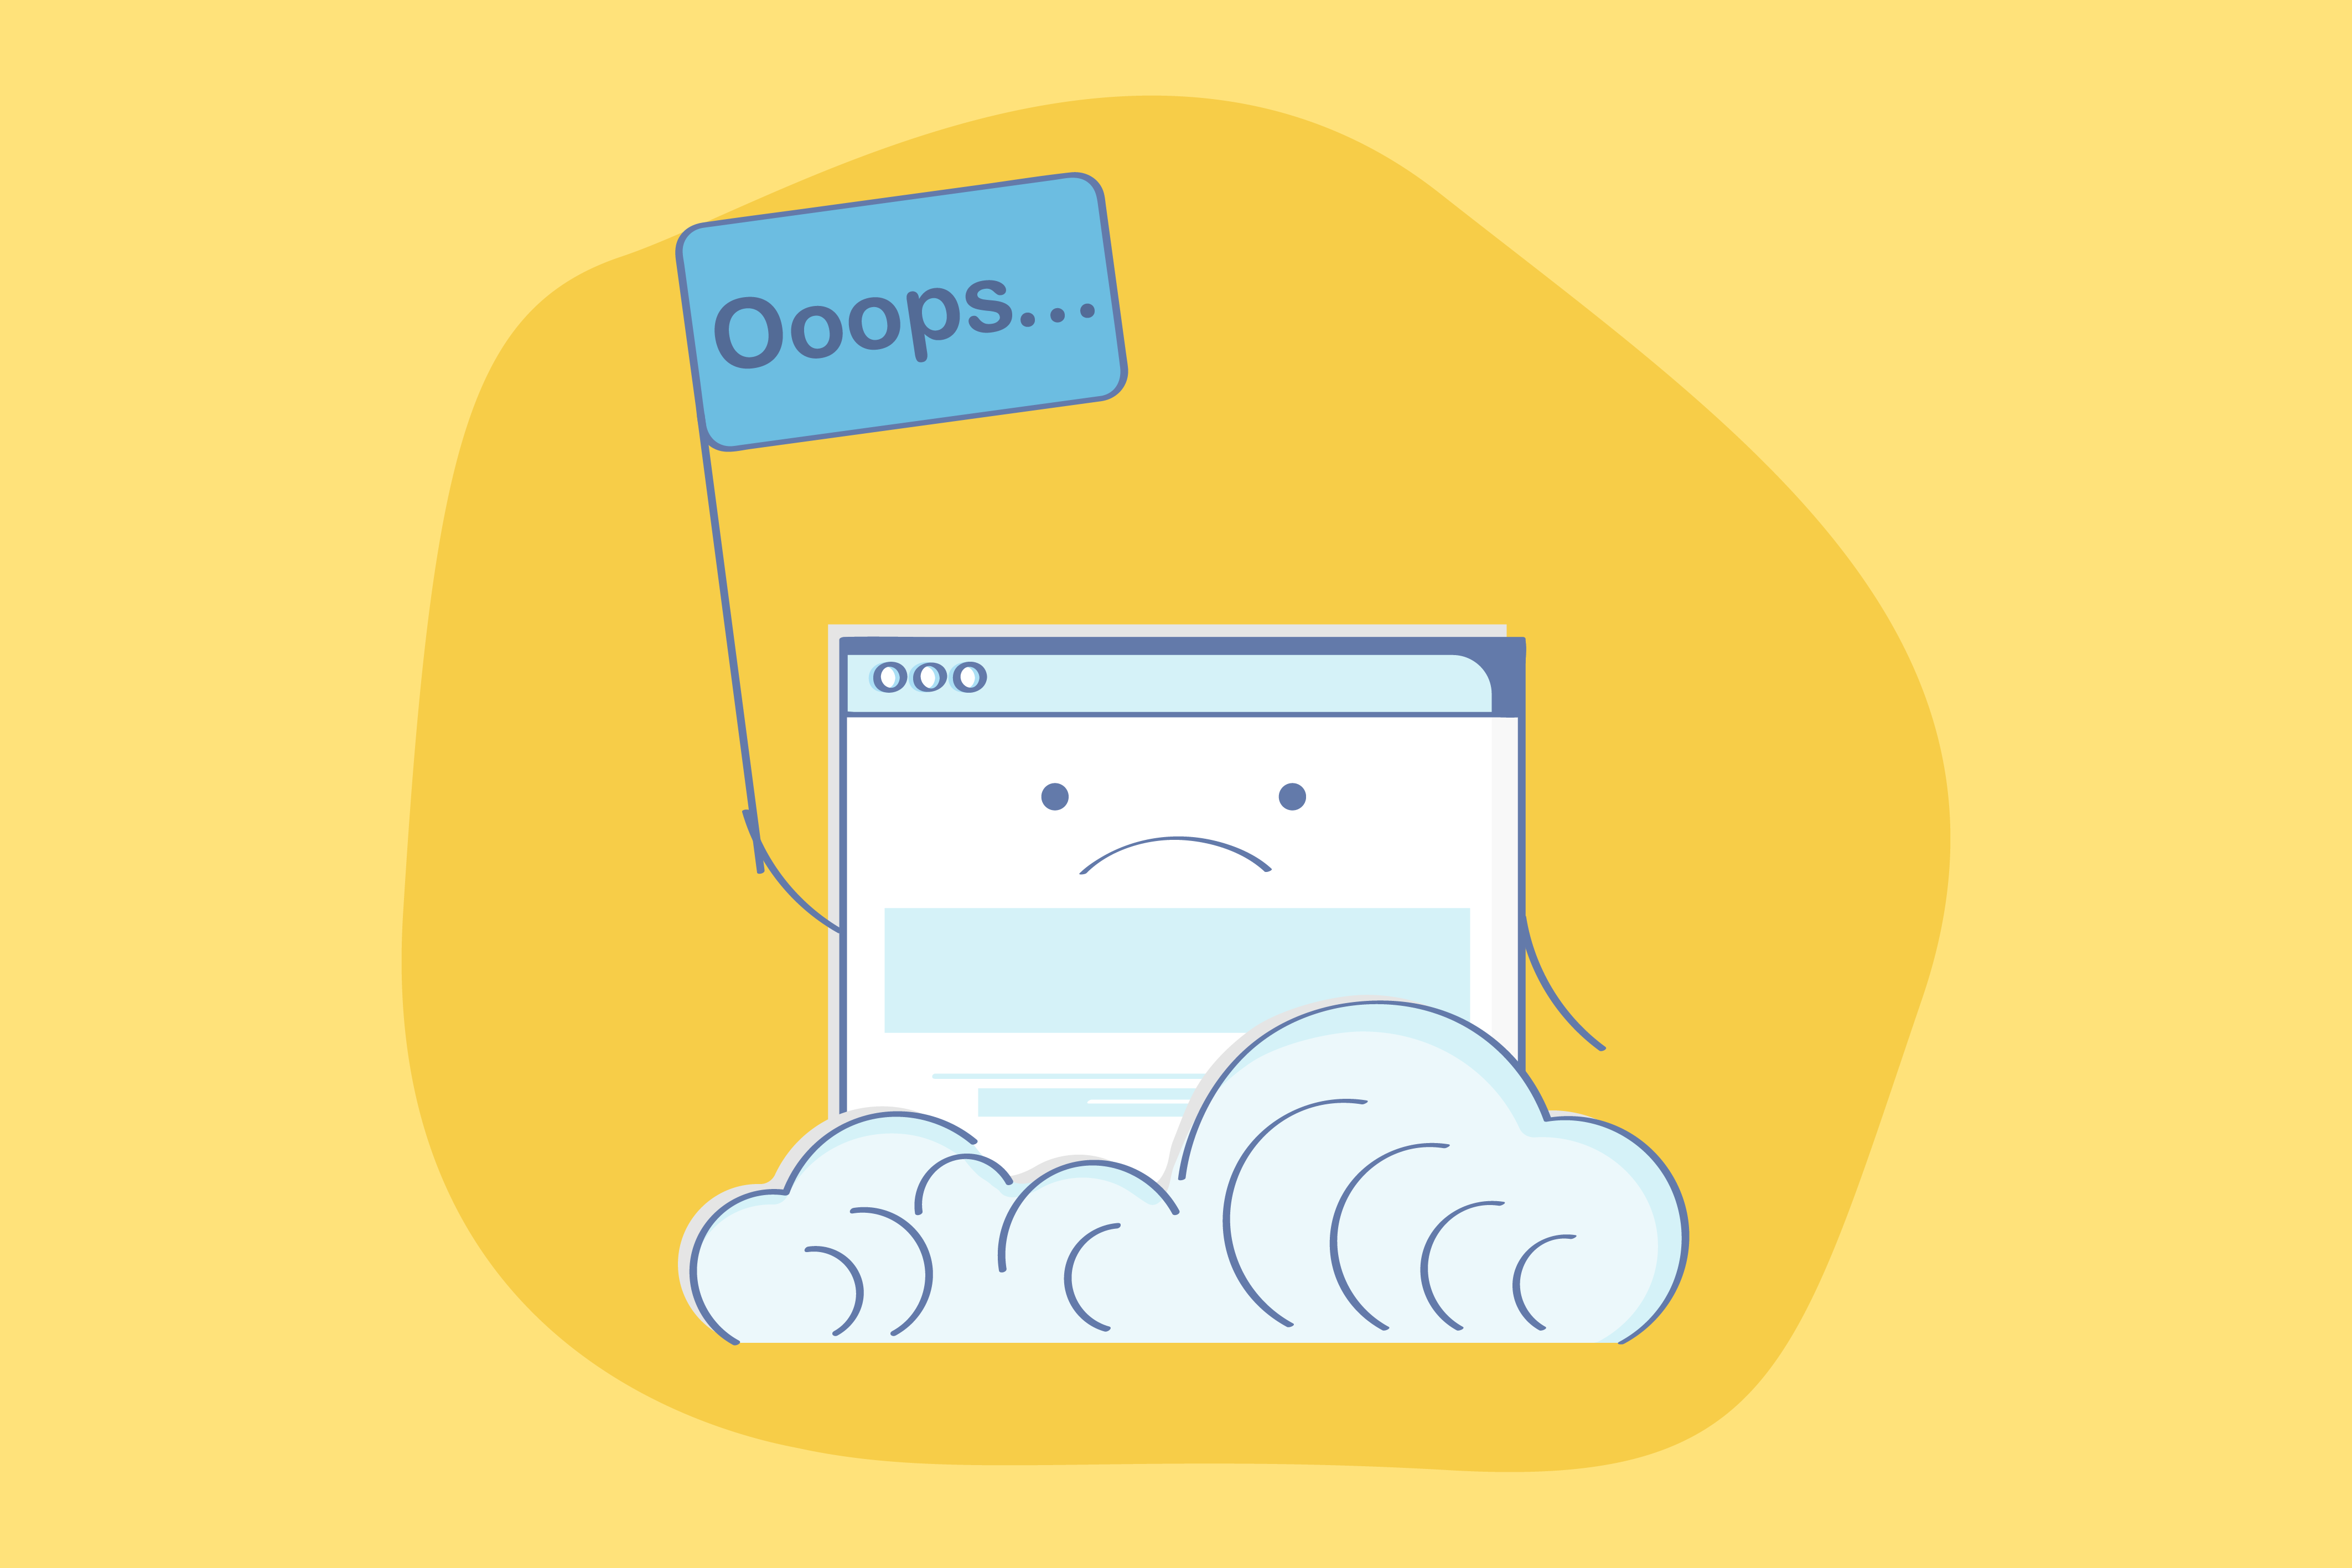 An illustration of a webpage character surrounded by clouds with a speech bubble that says "ooops..." indicating an error or problem has occurred.